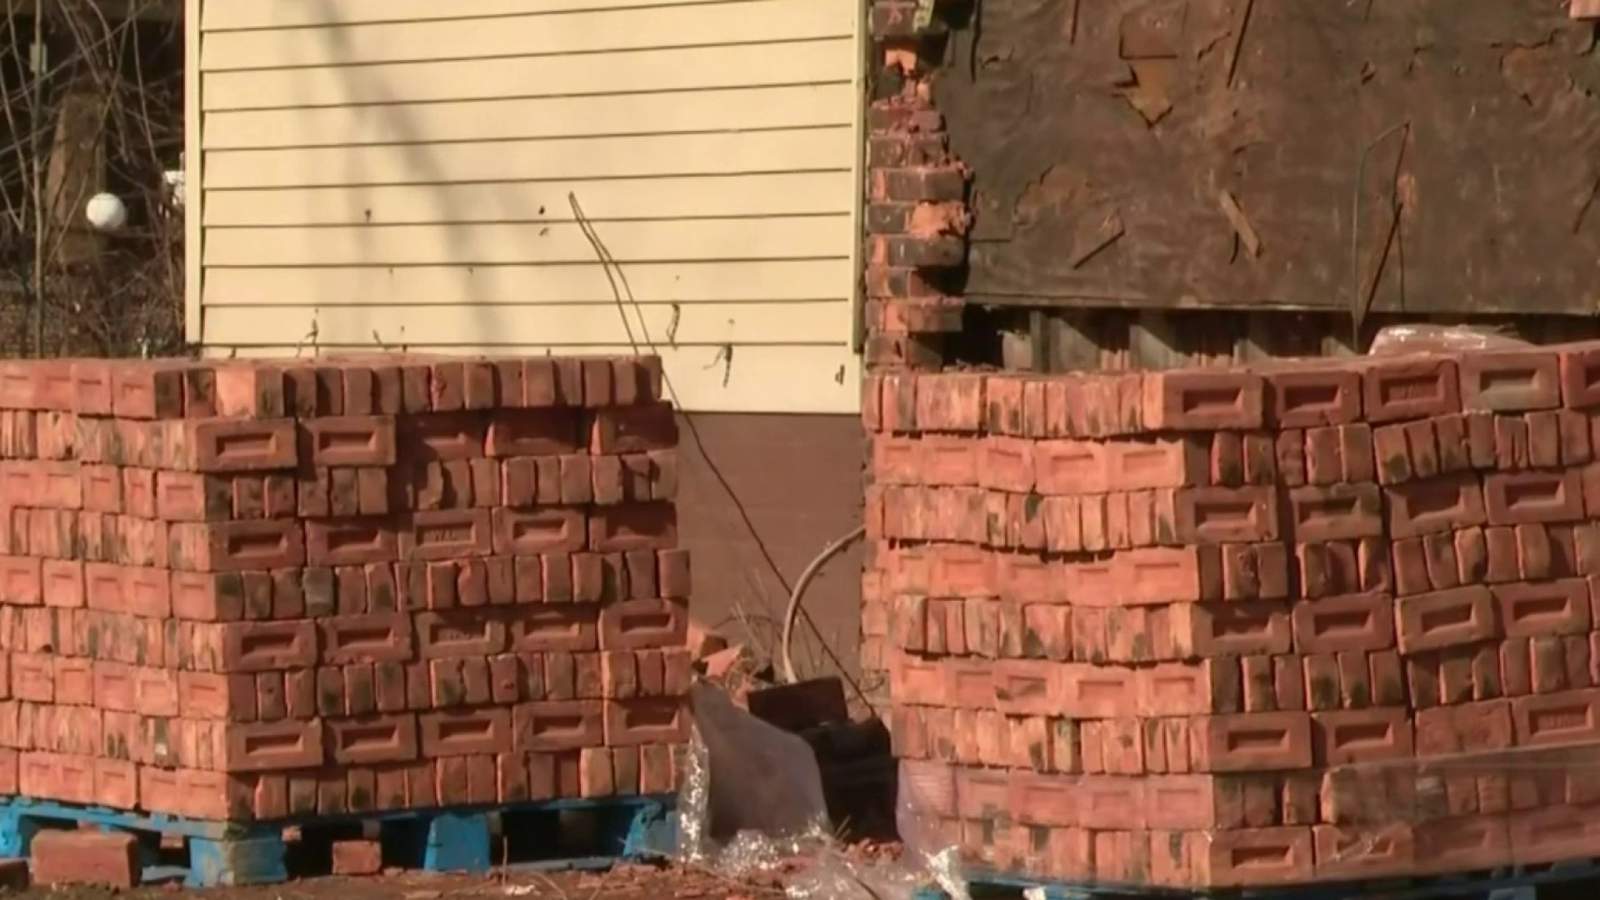 Police arrest 2 men who stole bricks while posing as demolition workers